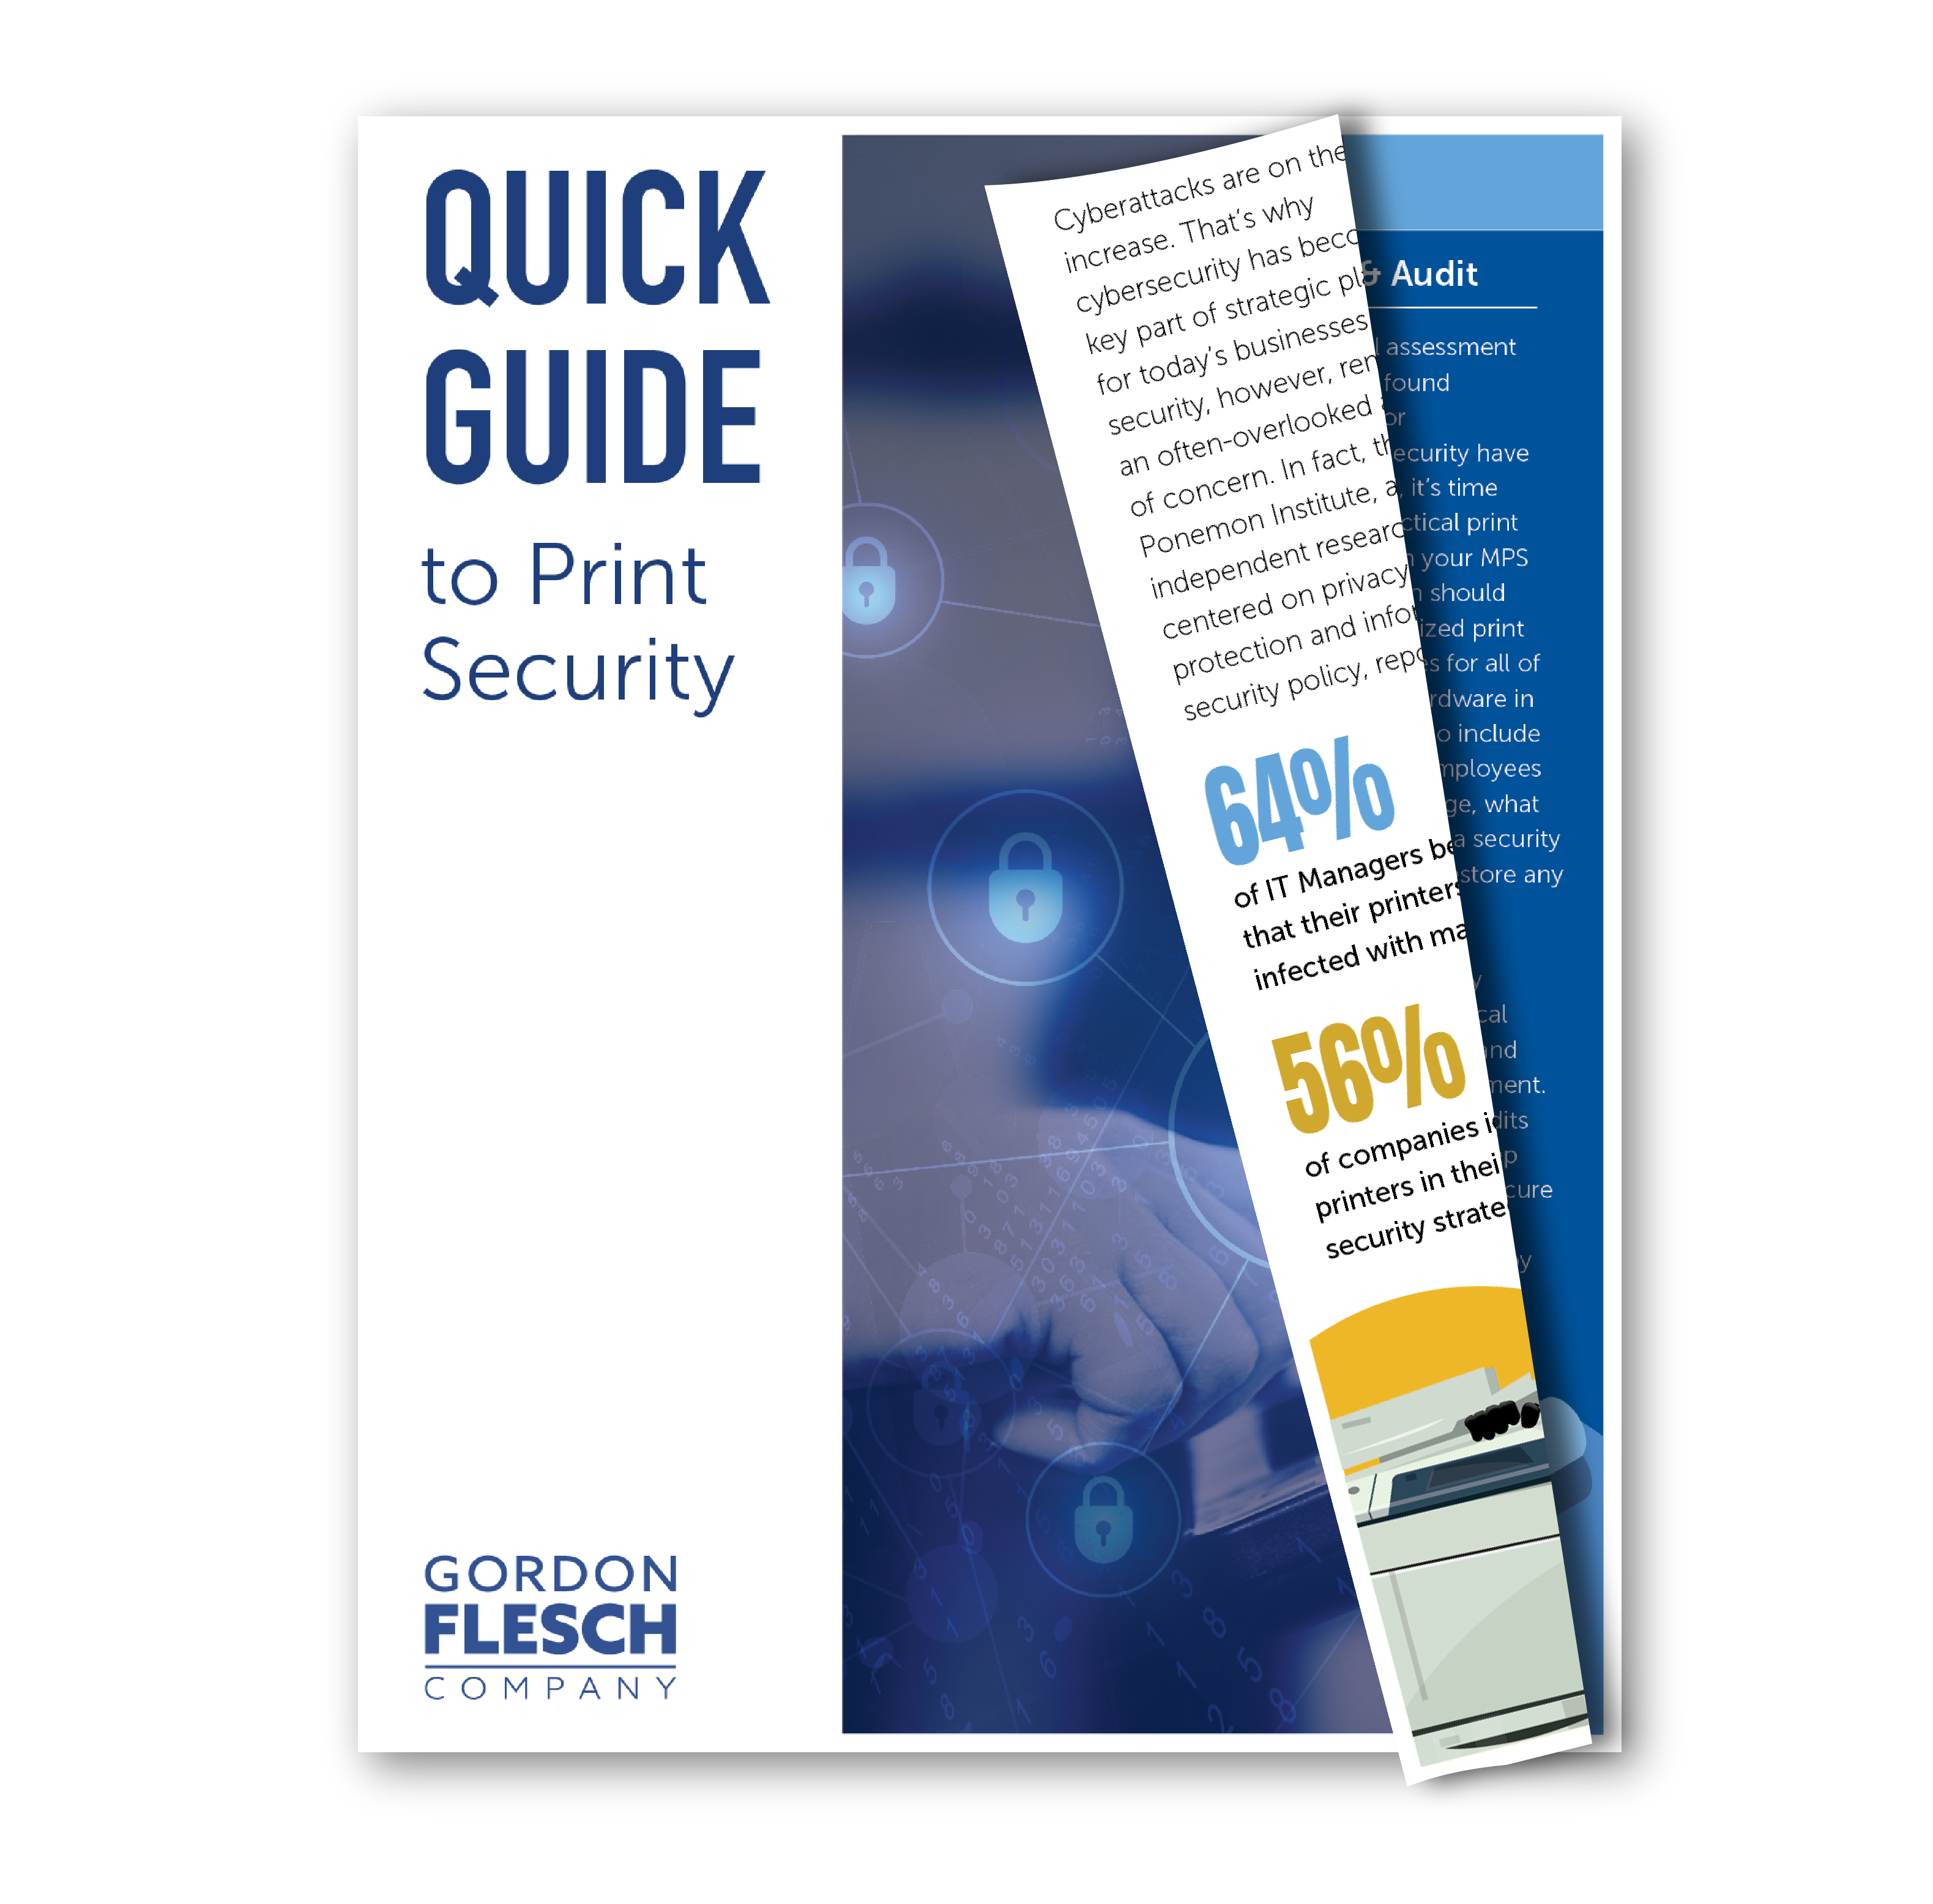 22-098_Print-Security_Pages